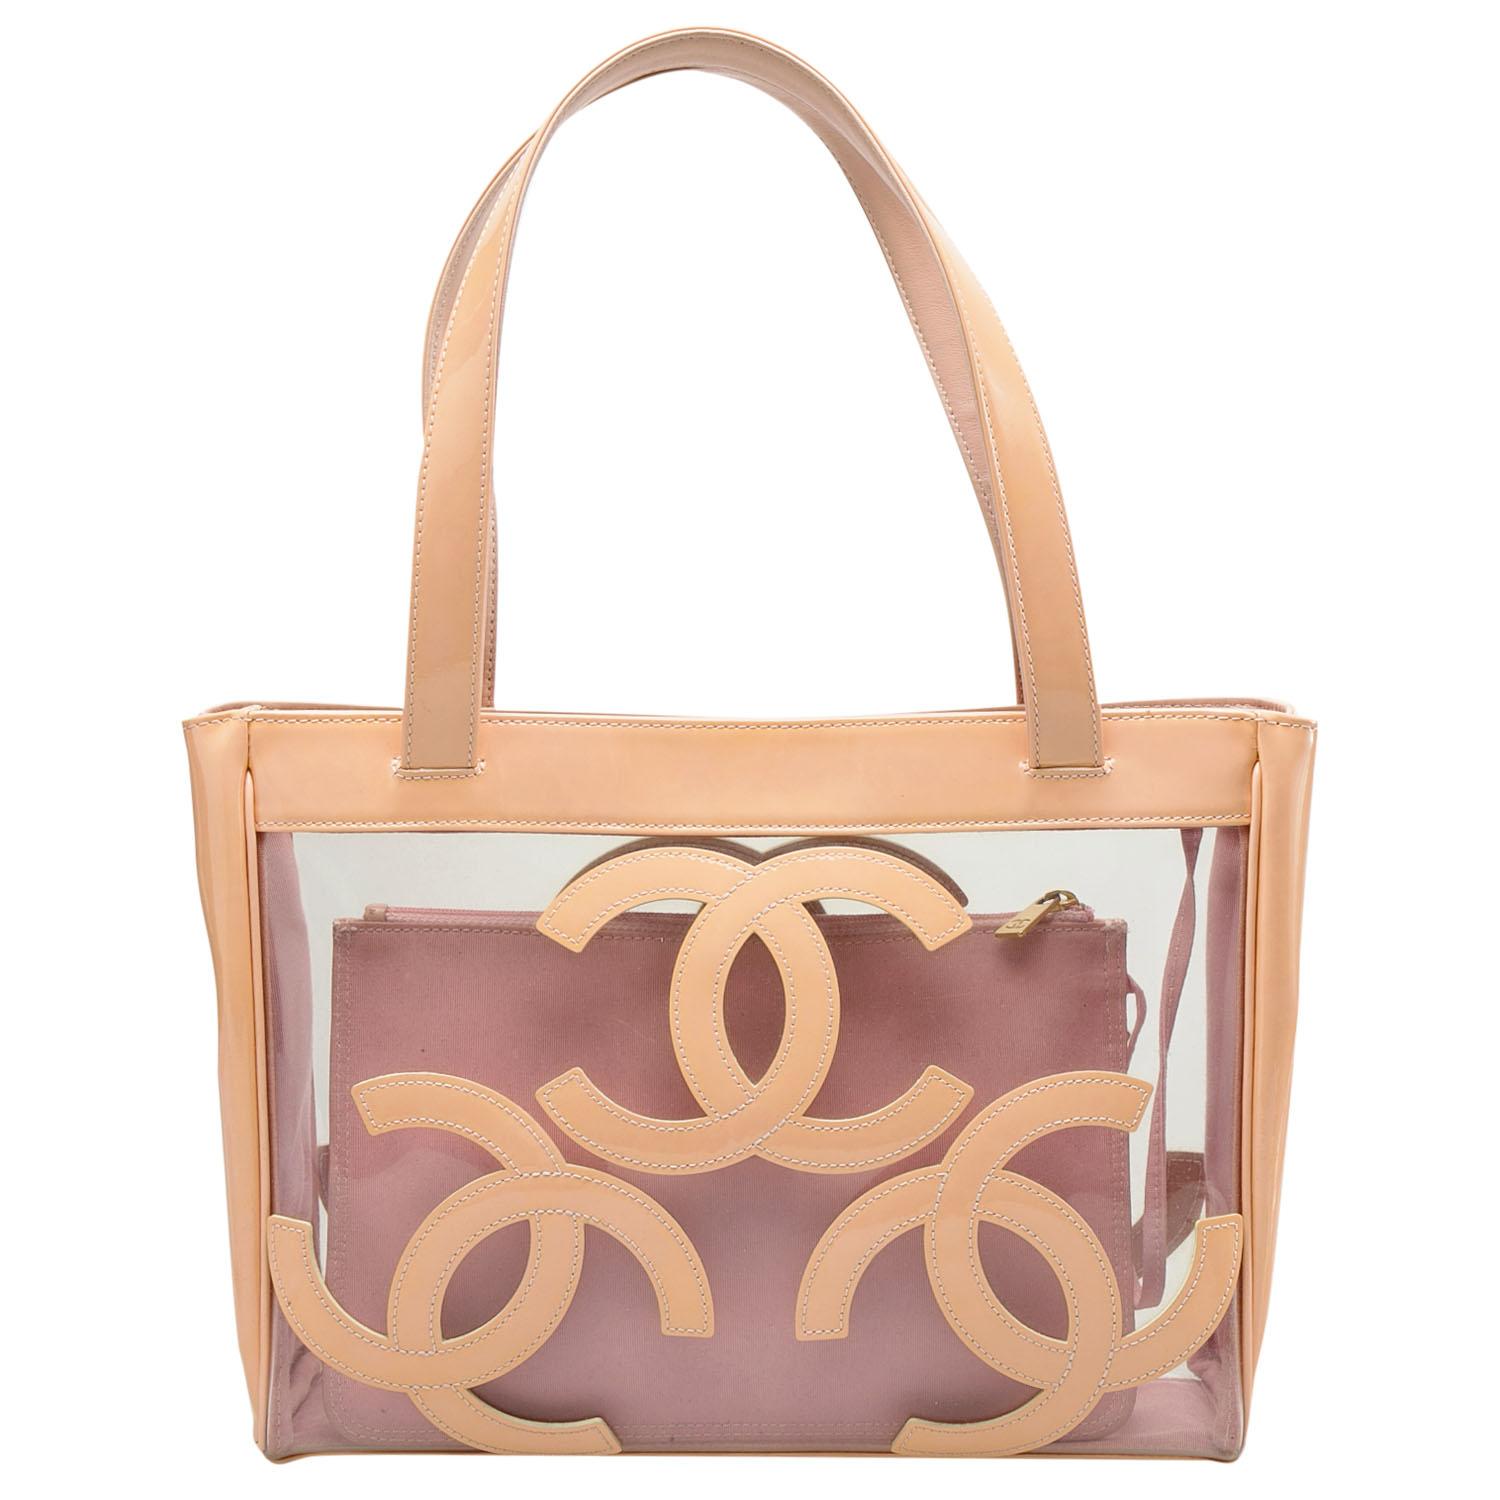 A lovely and unique creation from the house of Chanel, this Triple CC tote in medium size makes for an ideal bag for shopping outings, Sunday brunches and beach days. Rendered in clear PVC with light patent leather trims, the tote is styled three CC